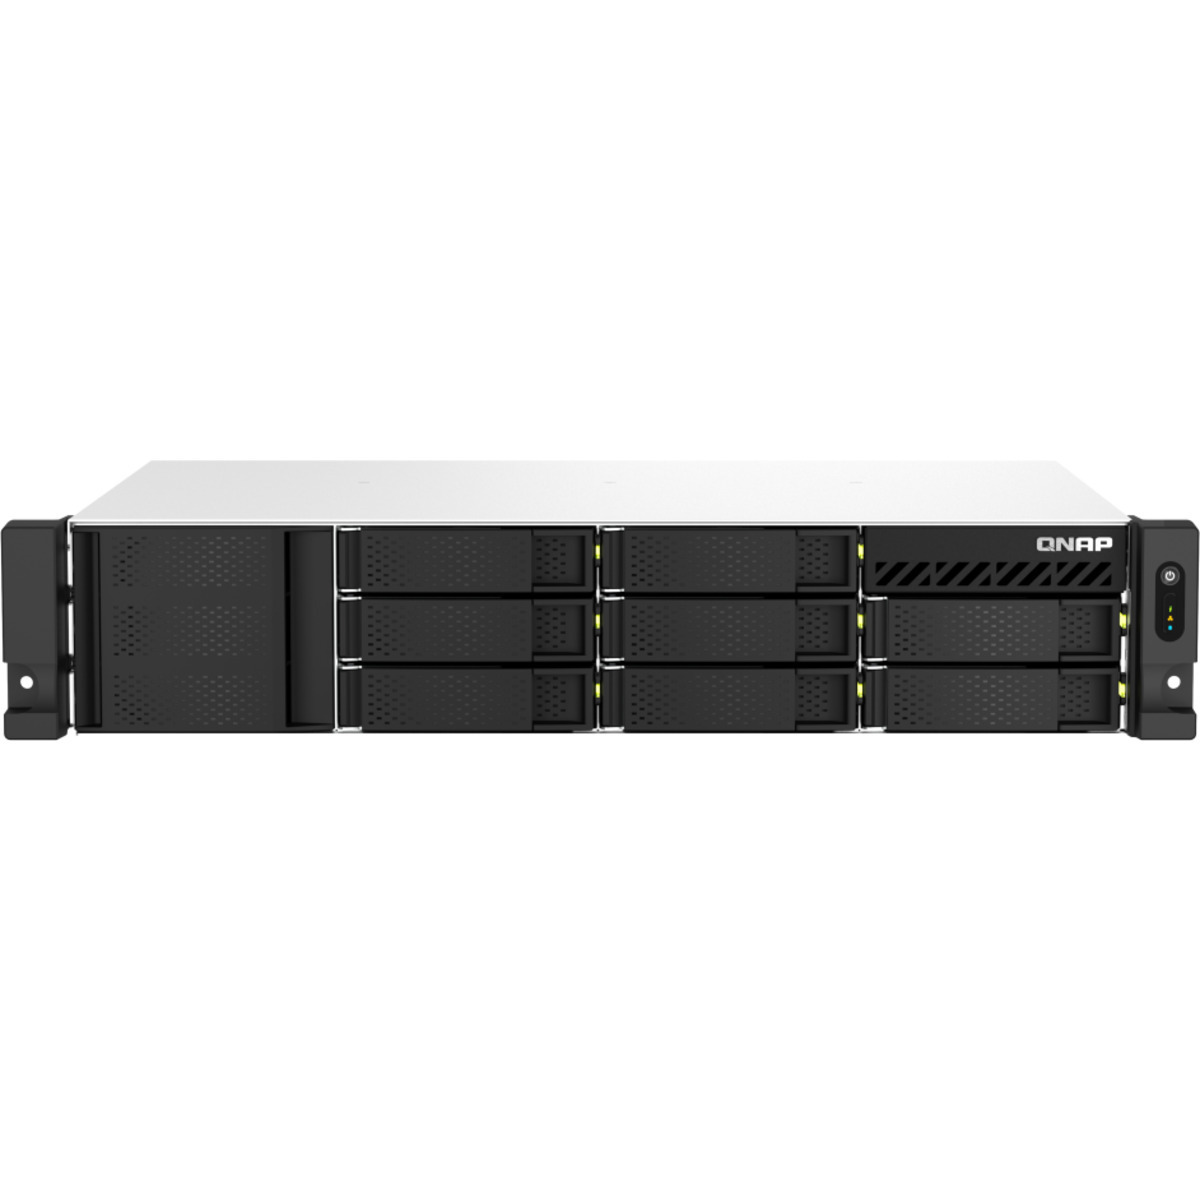 buy $2744 QNAP TS-873AeU 16tb RackMount NAS - Network Attached Storage Device 8x2000gb Seagate IronWolf Pro ST2000NT001 3.5 7200rpm SATA 6Gb/s HDD NAS Class Drives Installed - Burn-In Tested - FREE RAM UPGRADE - nas headquarters buy network attached storage server device das new raid-5 free shipping simply usa TS-873AeU